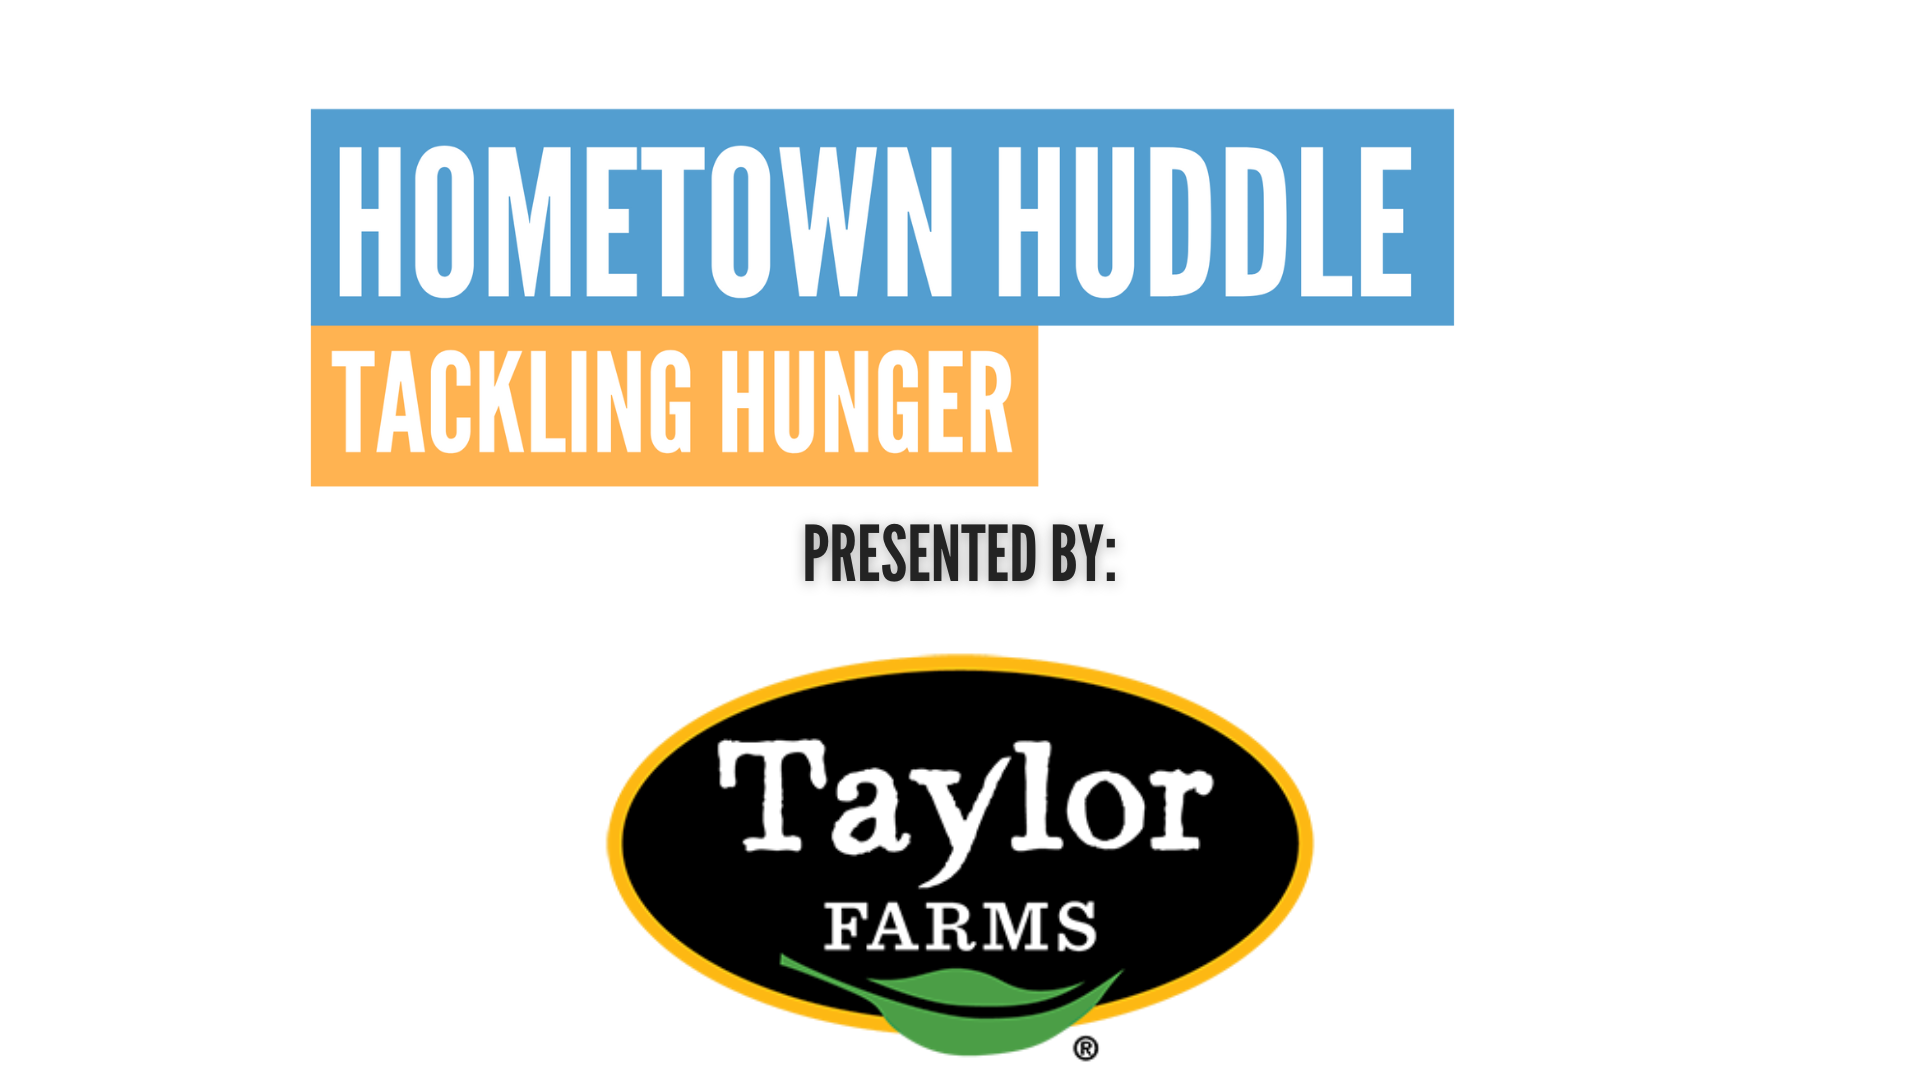 Presented by Taylor Farms